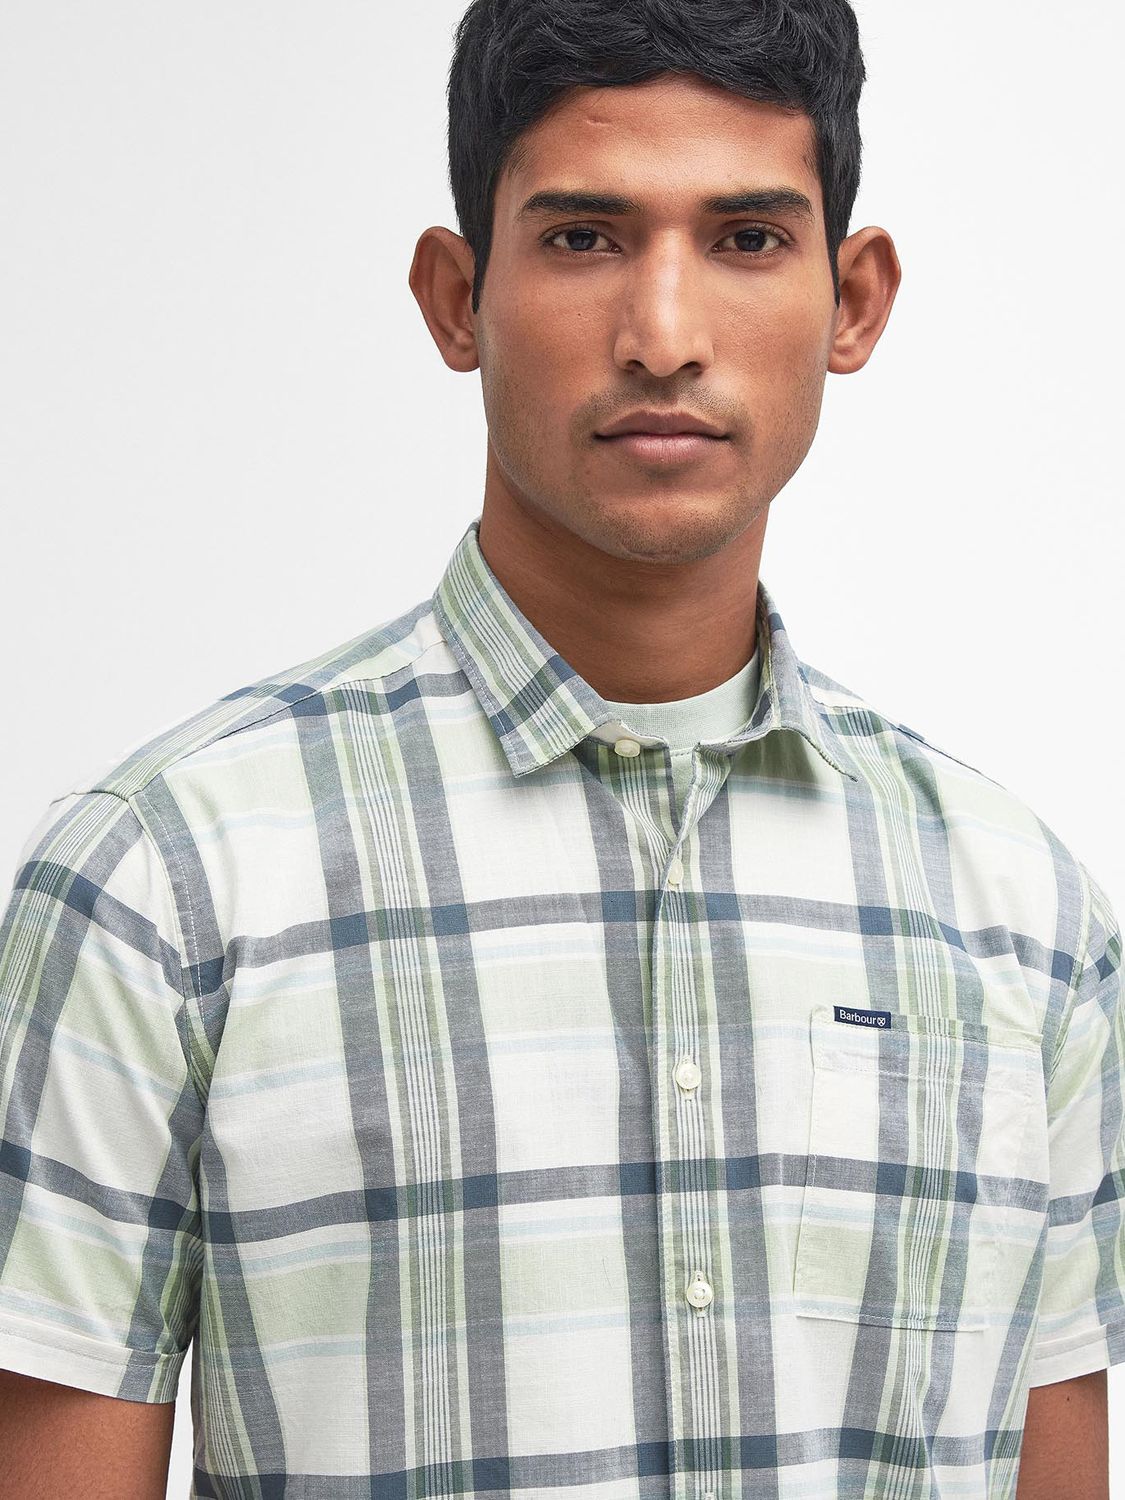 Barbour Rosewell Short Sleeve Check Shirt, Green/Multi, S